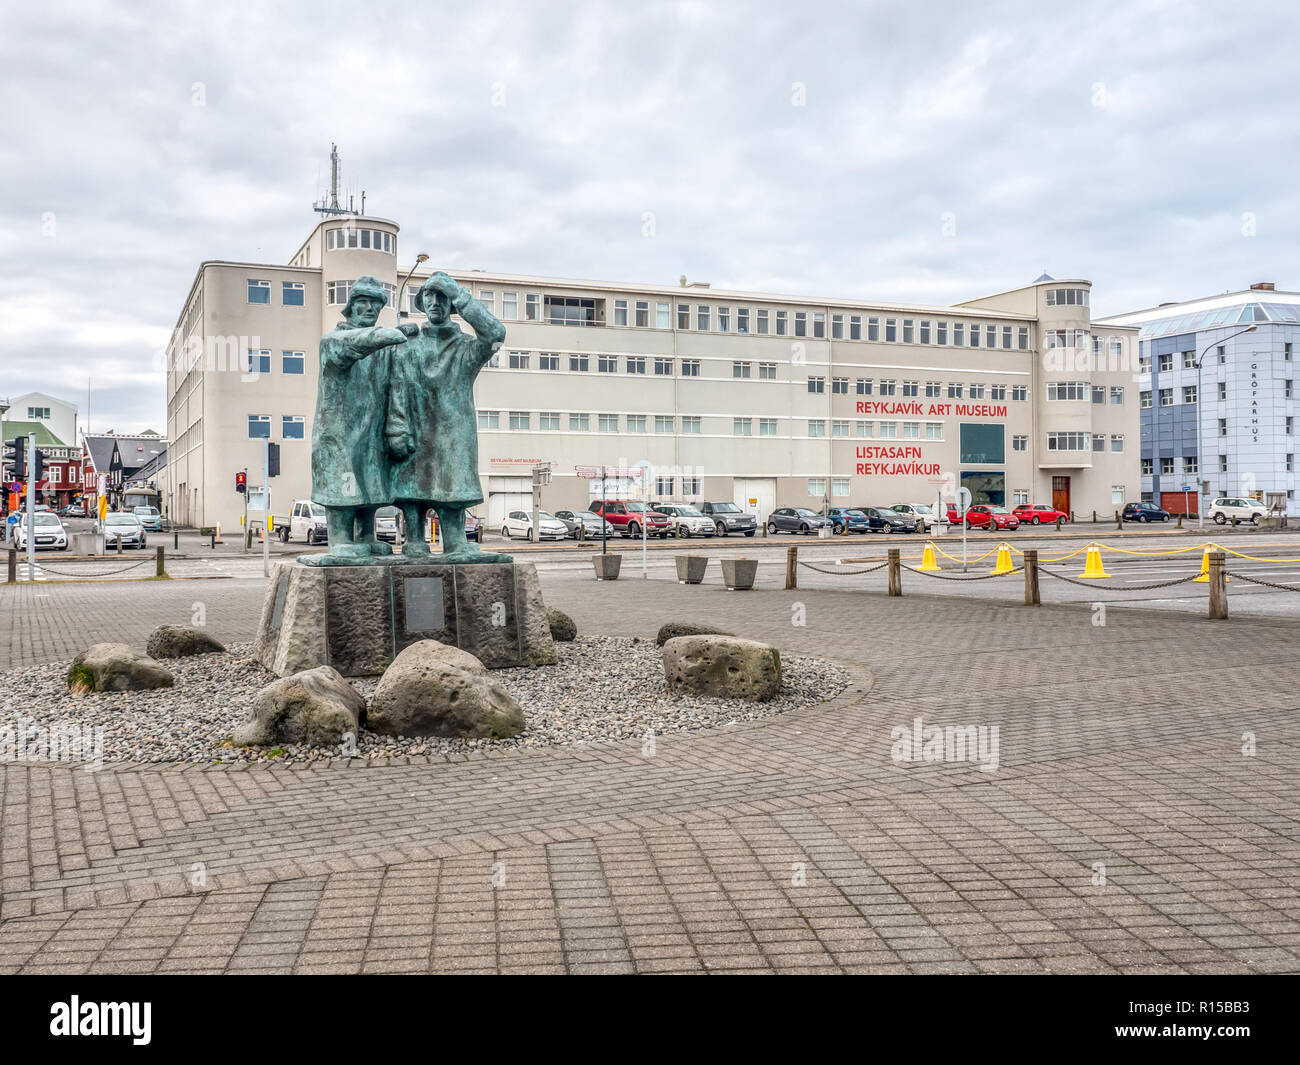 Statues on a street in Old Harbor, Downtown Reykjavik, Iceland Stock Photo